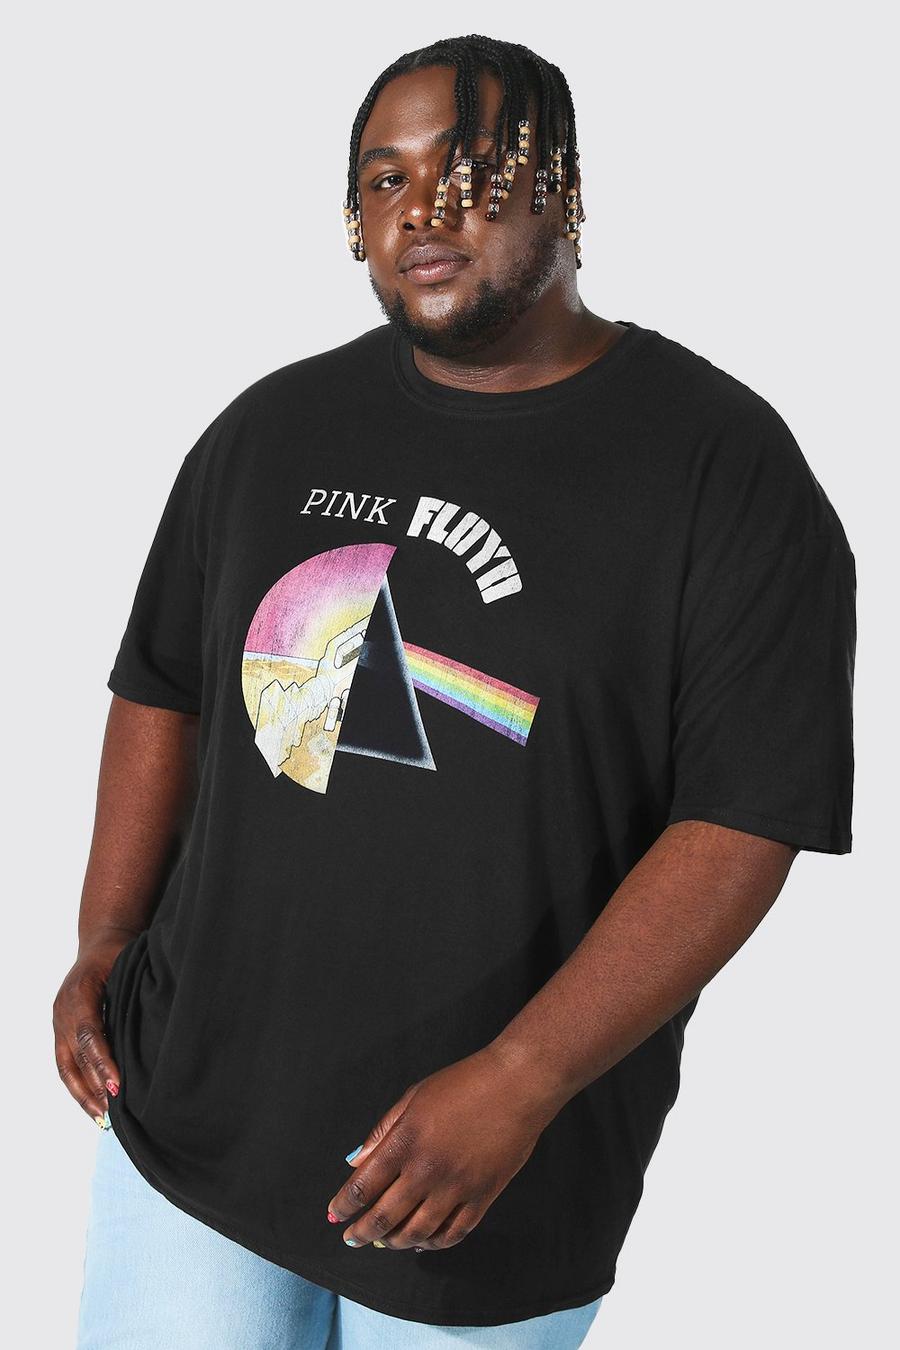 T-shirt Plus Size ufficiale Pink Floyd, effetto patchwork, Black nero image number 1